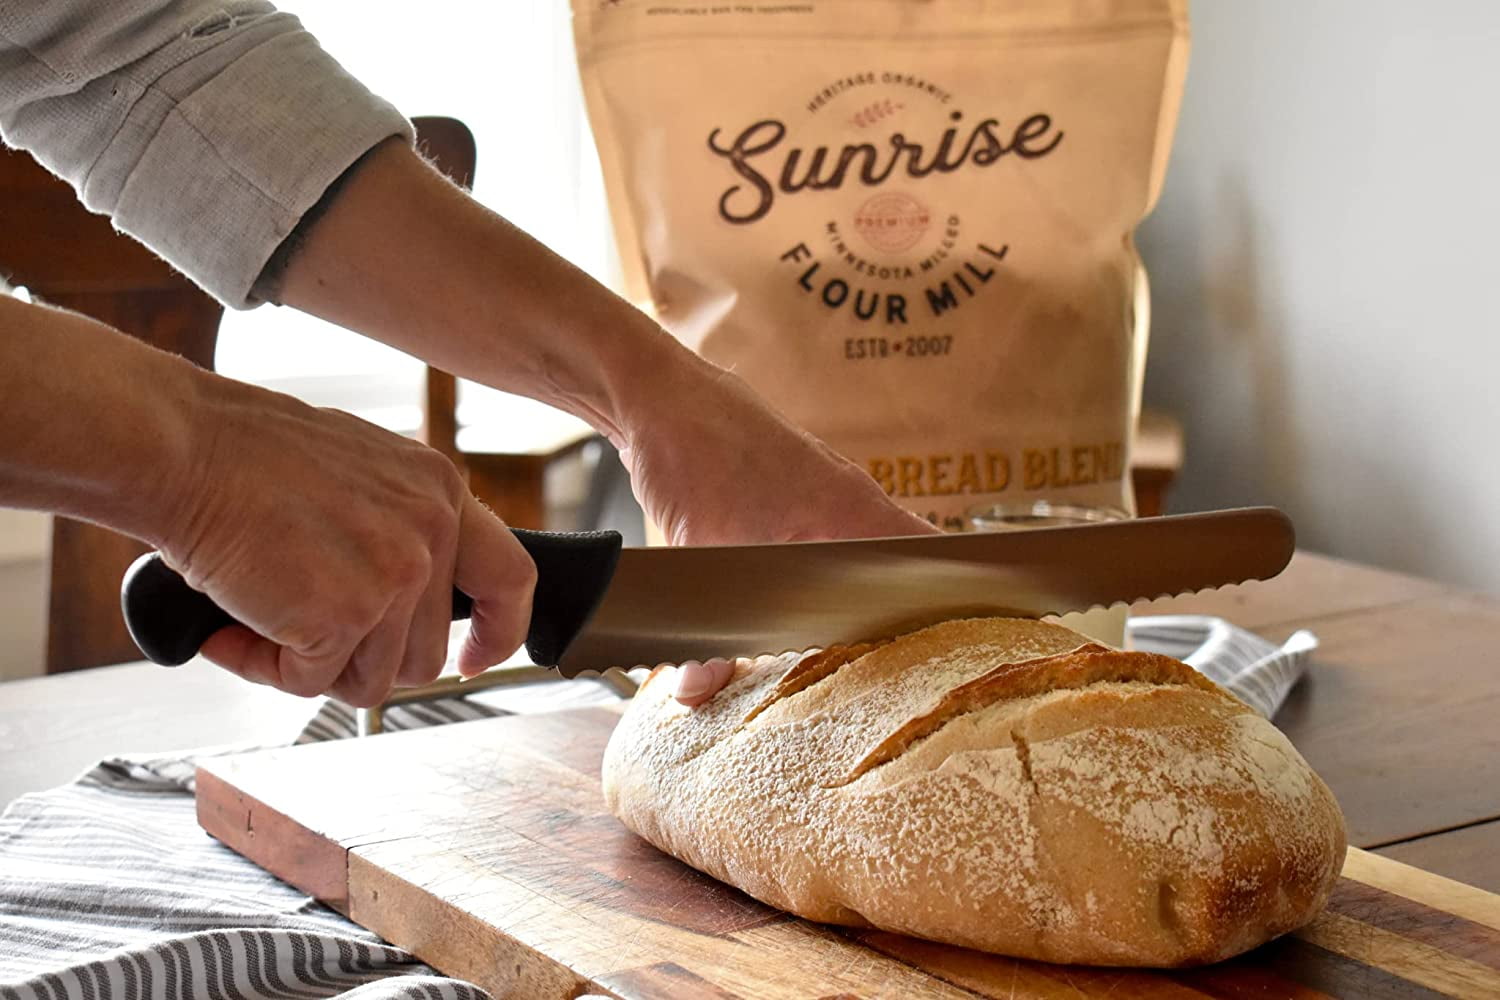 Sunrise Flour Mill | Lame Bread Scoring Tool w/ Blades & Leather Cover